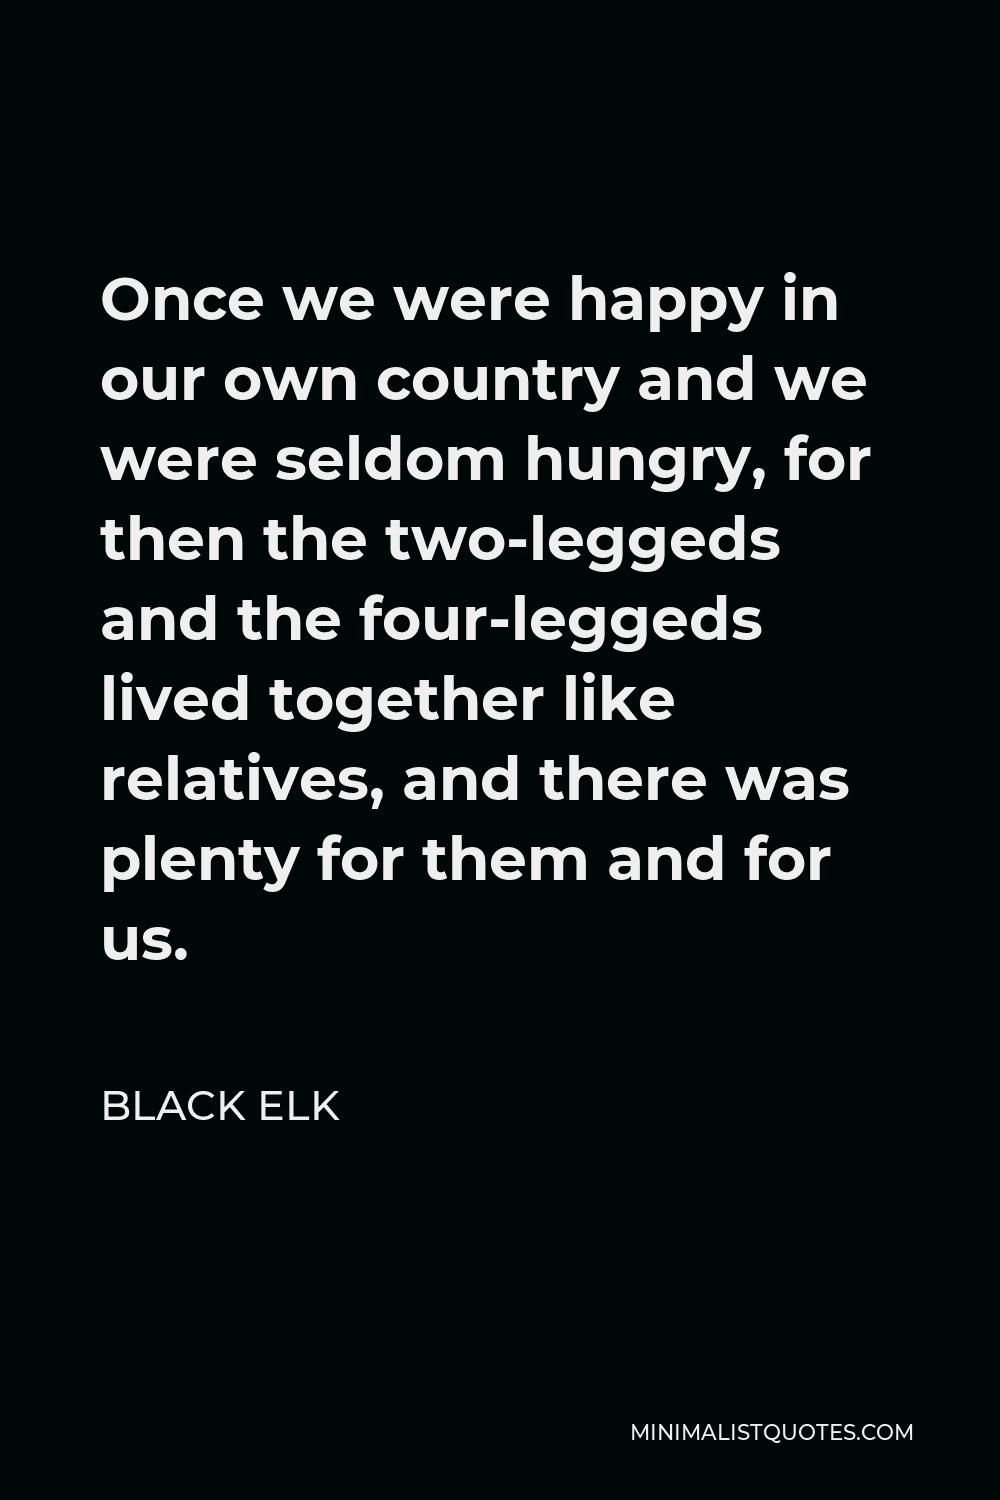 Black Elk Quote - Once we were happy in our own country and we were seldom hungry, for then the two-leggeds and the four-leggeds lived together like relatives, and there was plenty for them and for us.